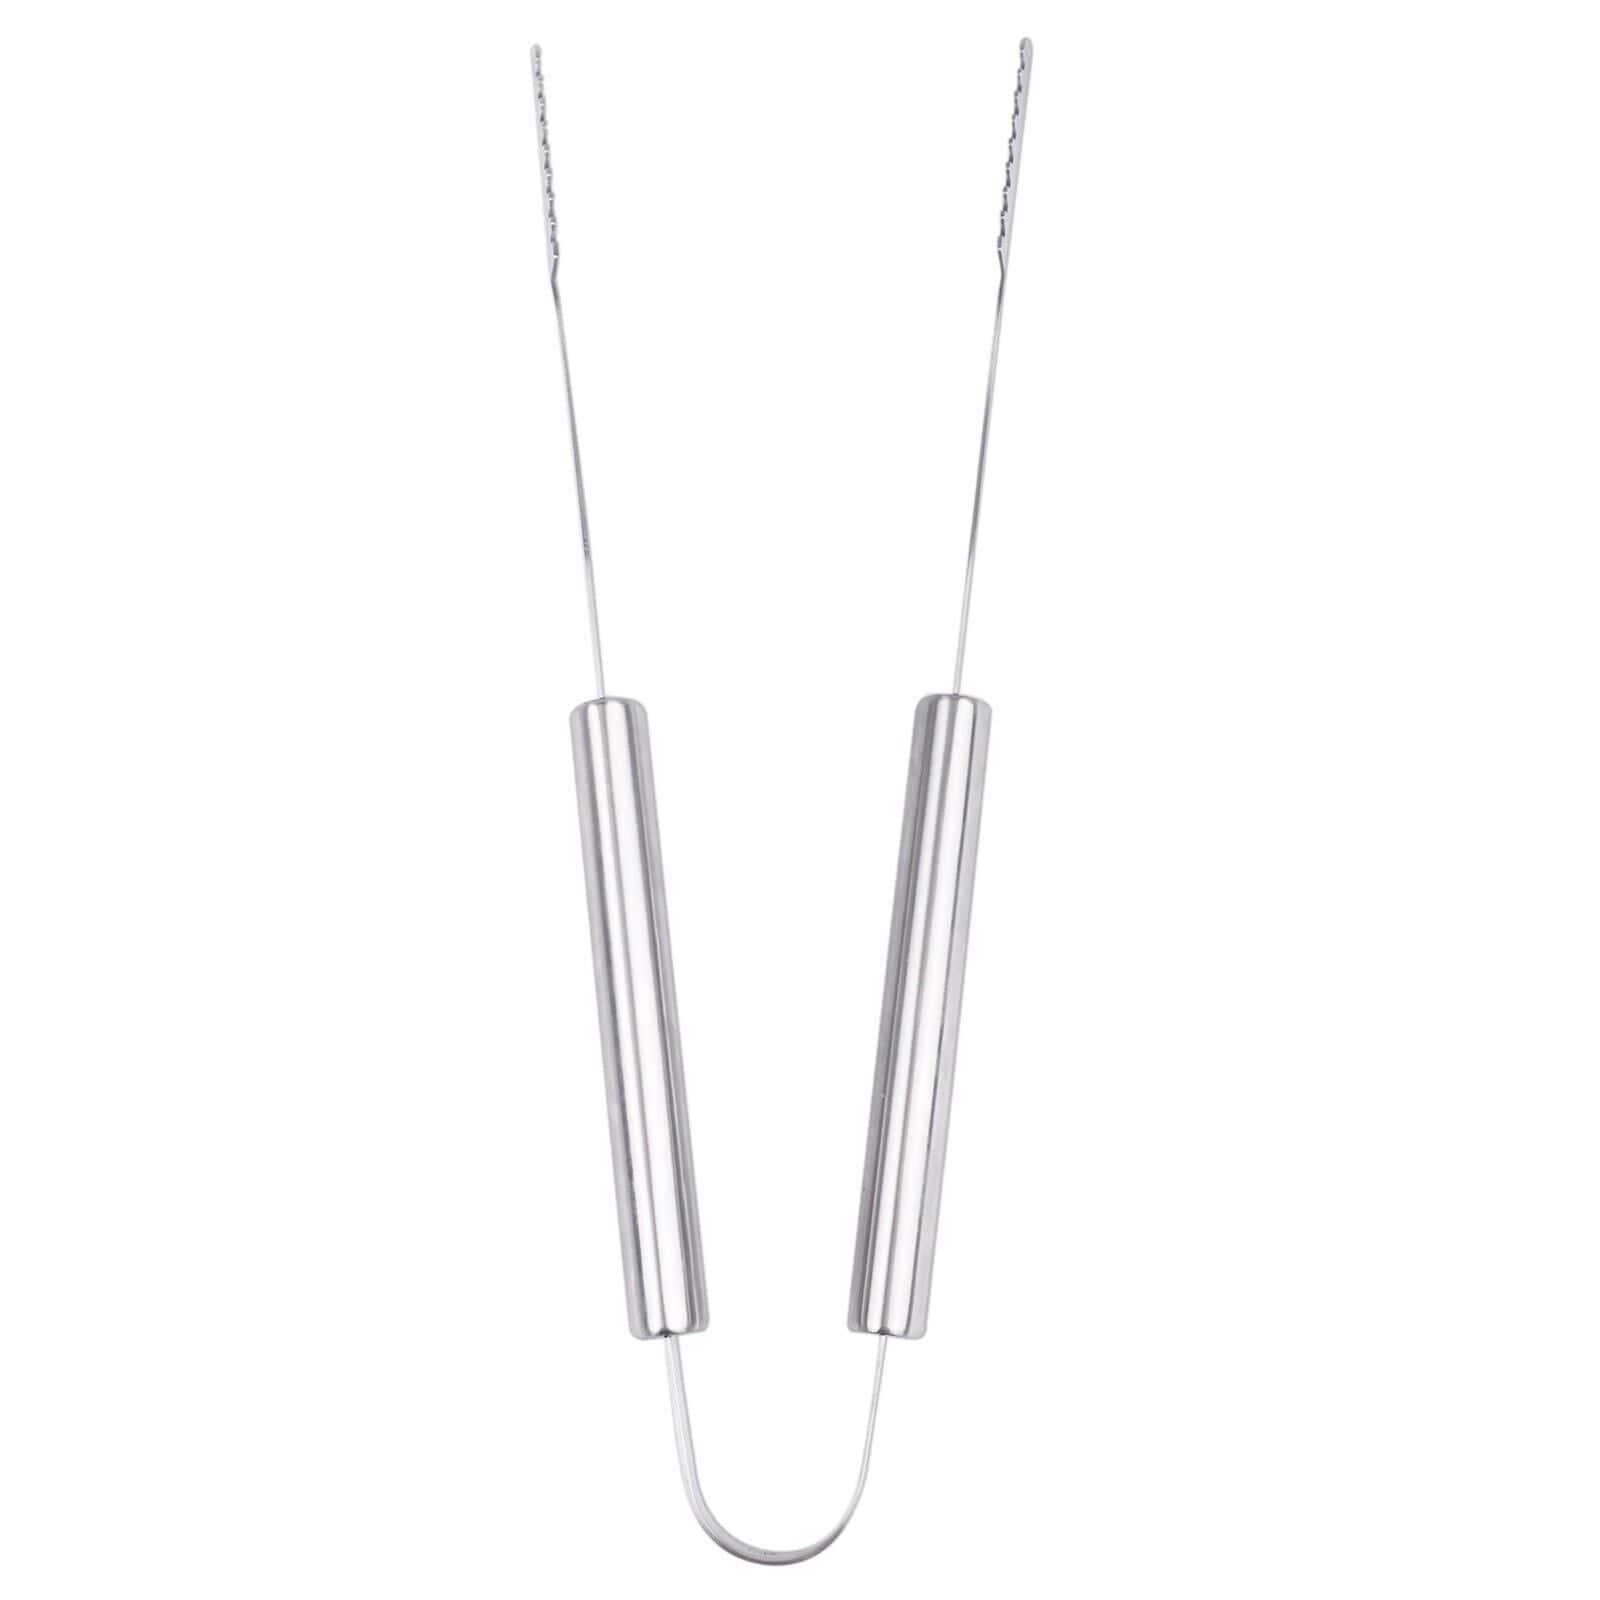 A silver necklace with two metal rods hanging from it.